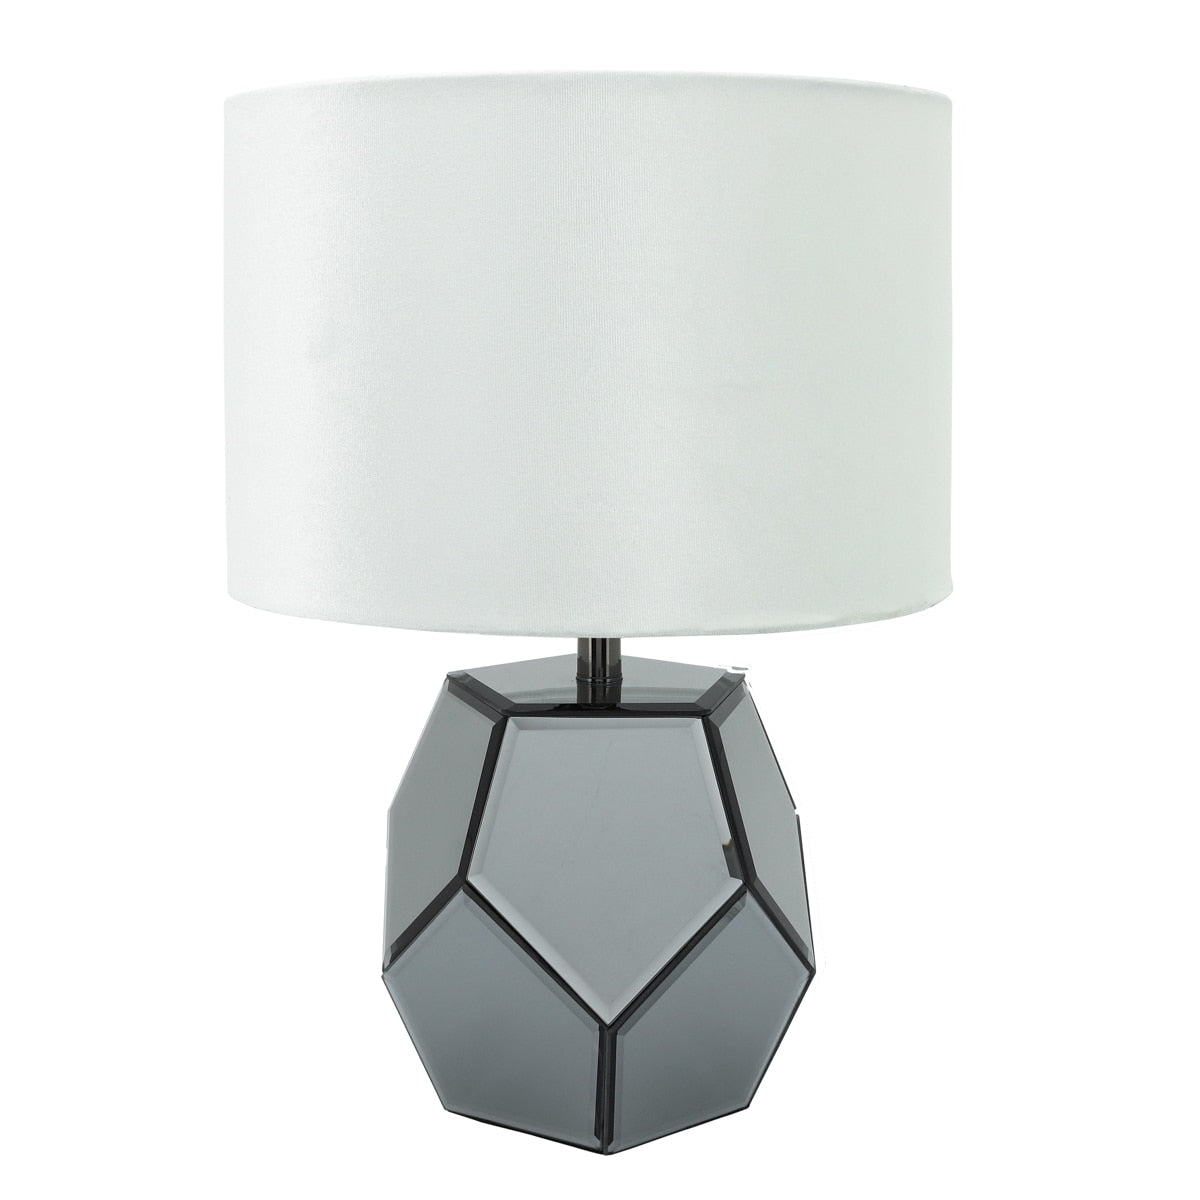 Mirrored 17.25" Facetd Table Lamp, Silver